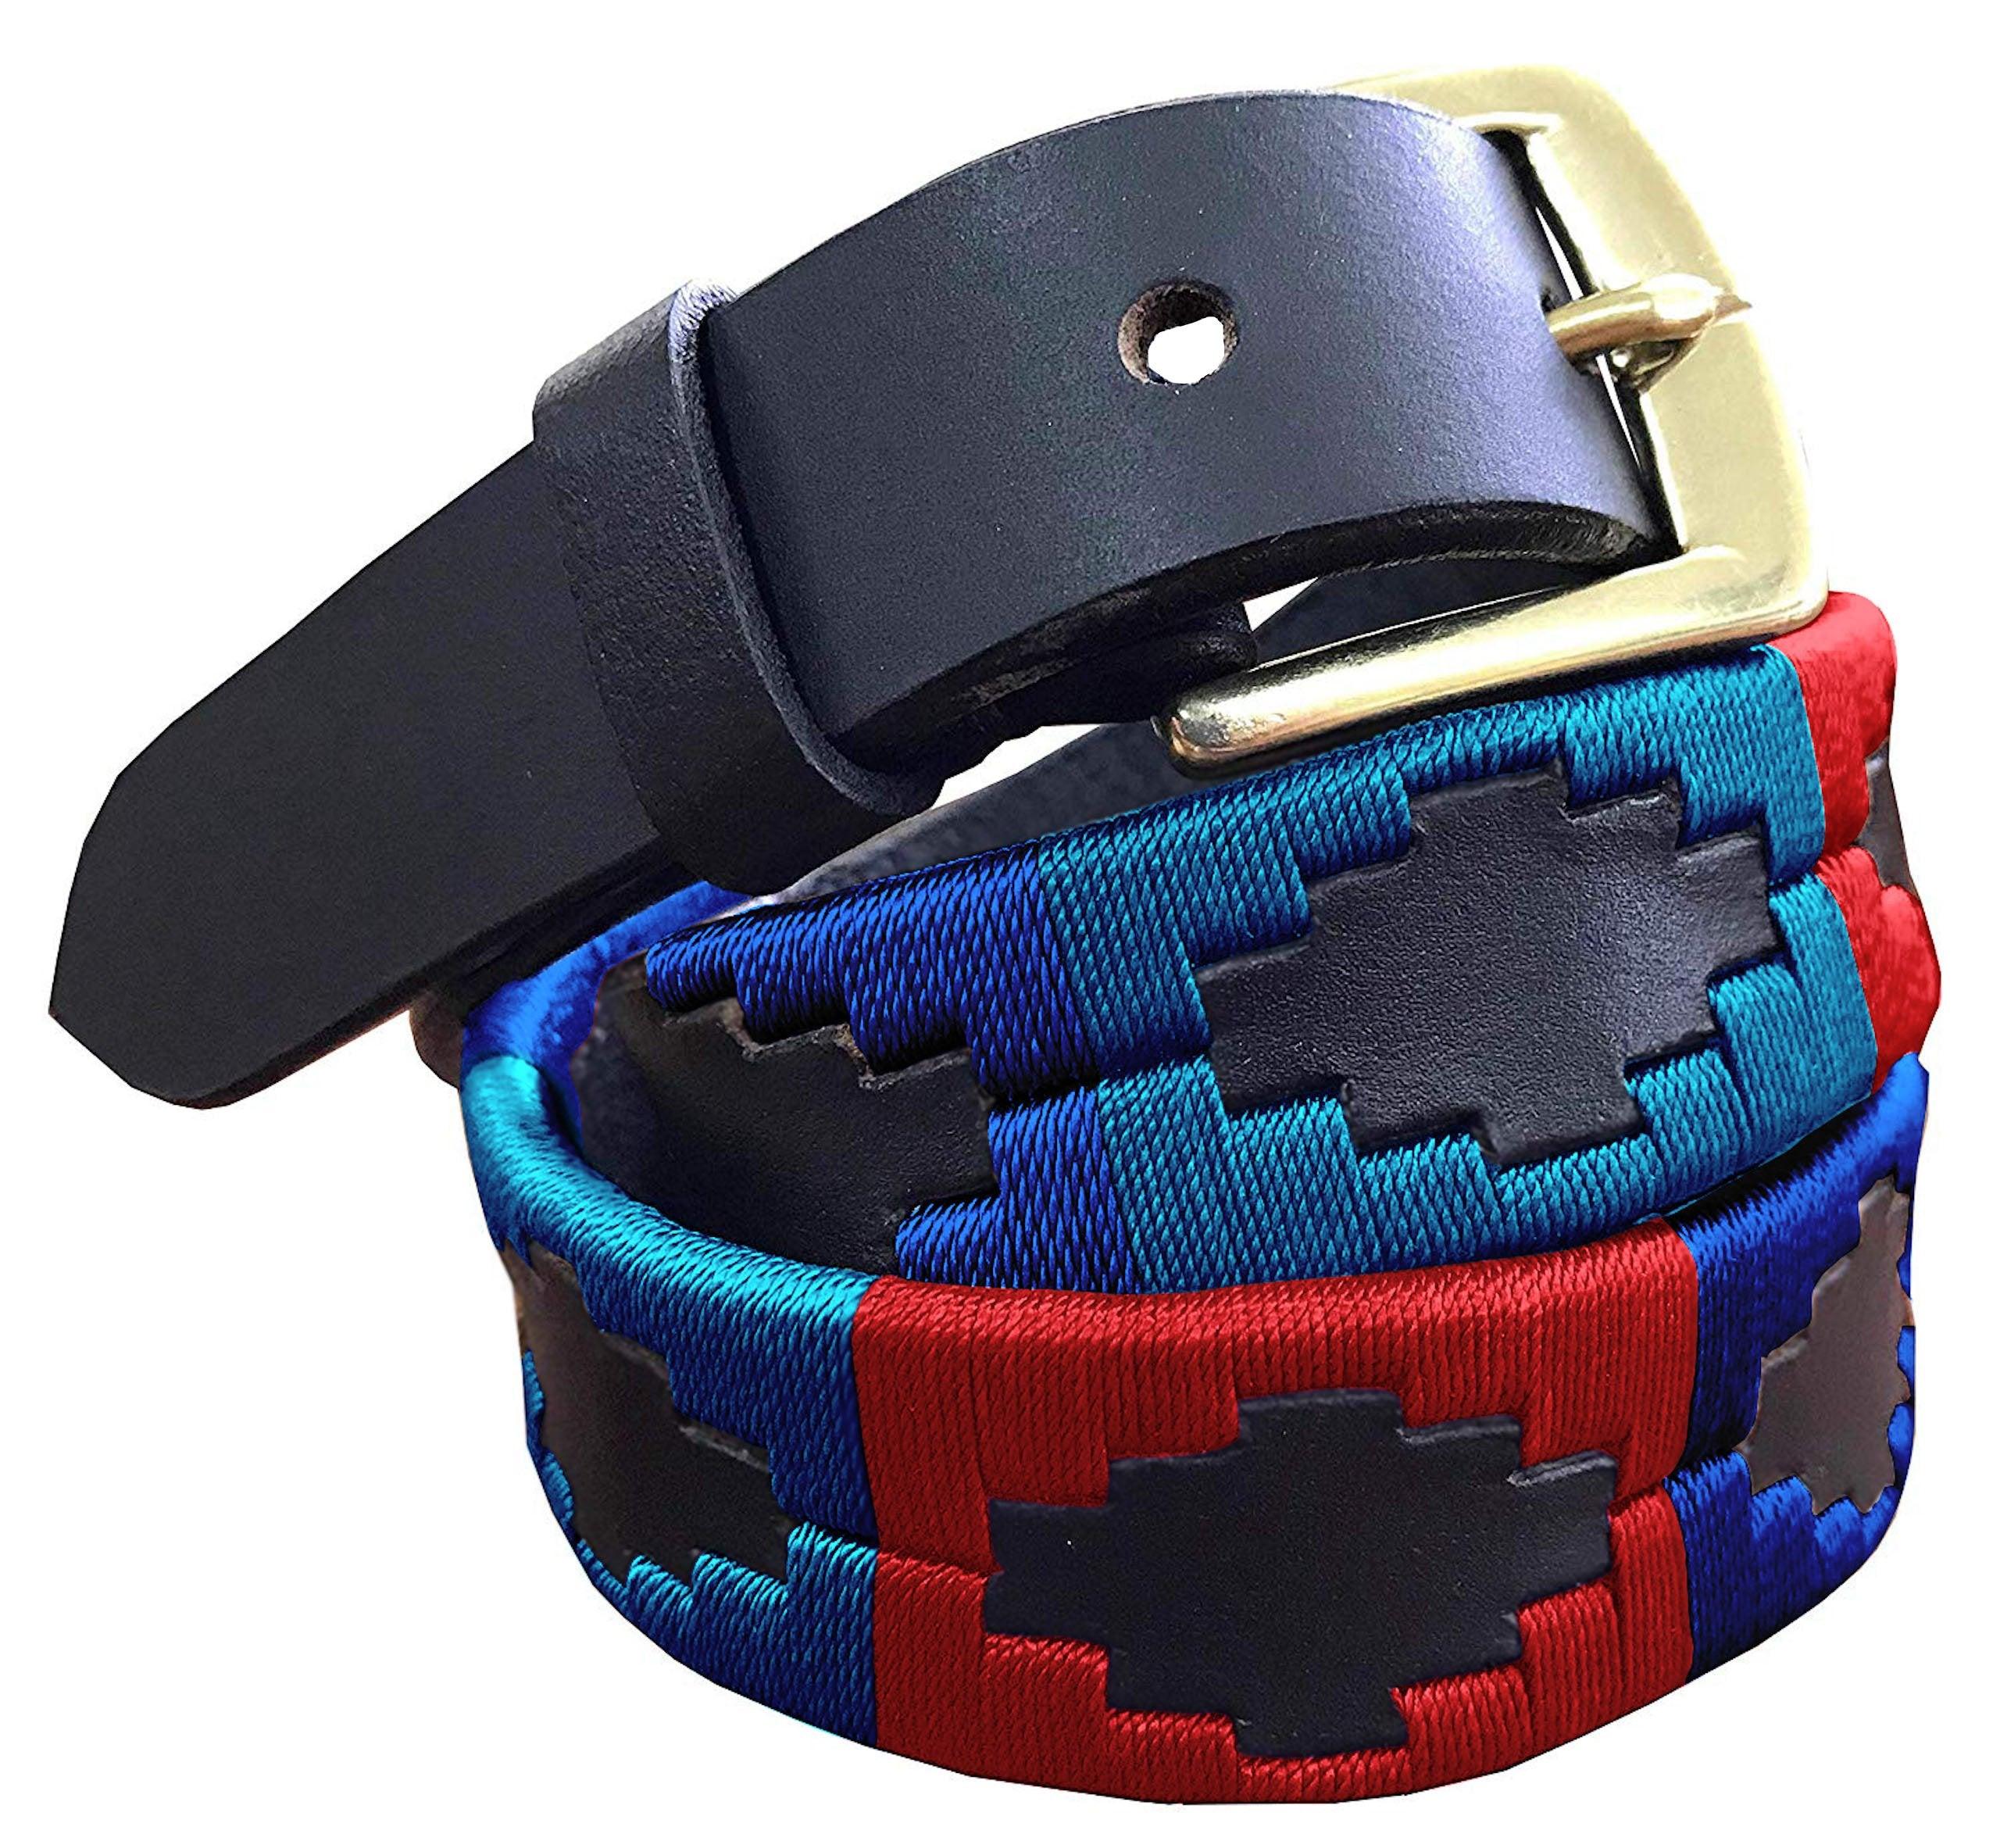 SKINNY POLO BELT BLUE/RED AND BLUE/CREAM 